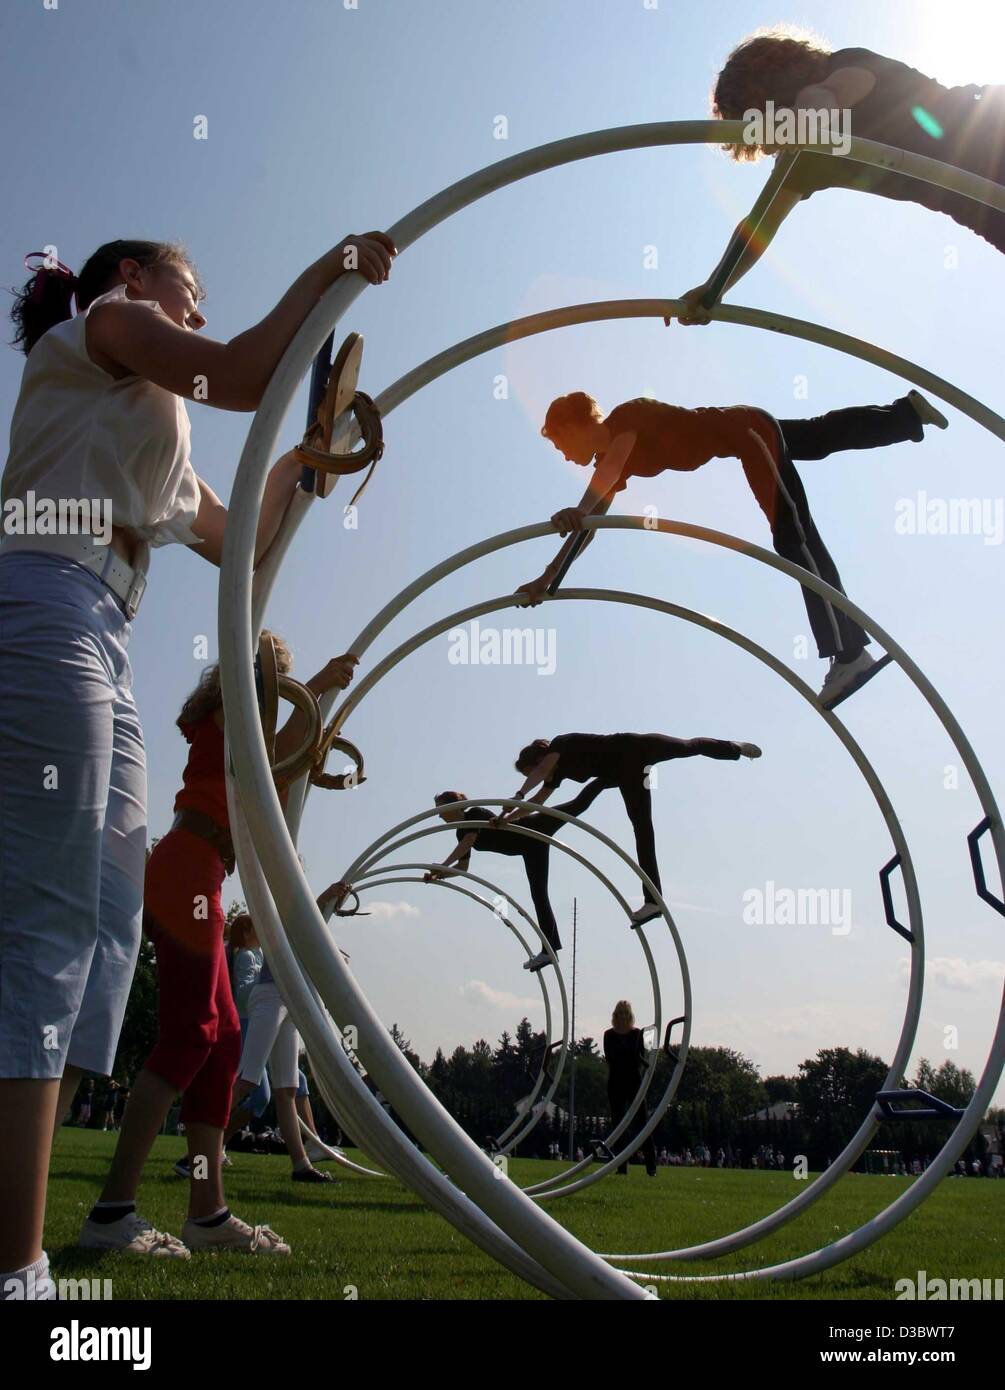 (dpa) - A group of gymnasts roll around a sports arena in a gymwheel during a promotional event for sports, in Nuremberg, Germany, 23 July 2003. Stock Photo